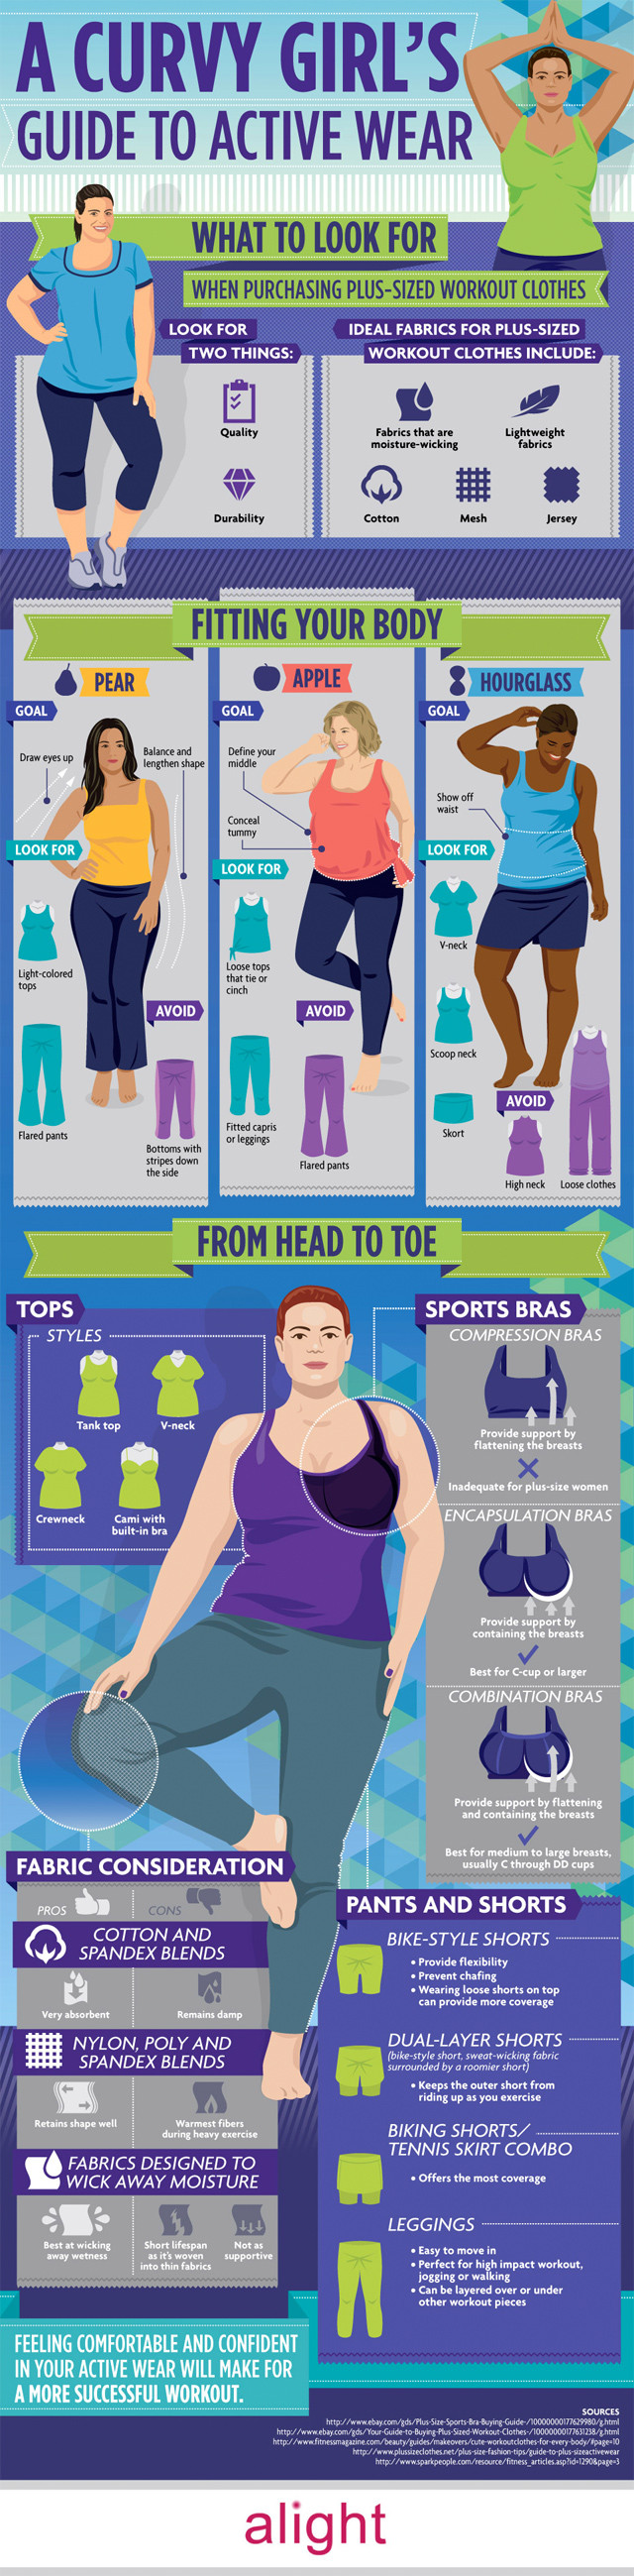 A Curvy Girl’s Guide To Active Wear #infographic